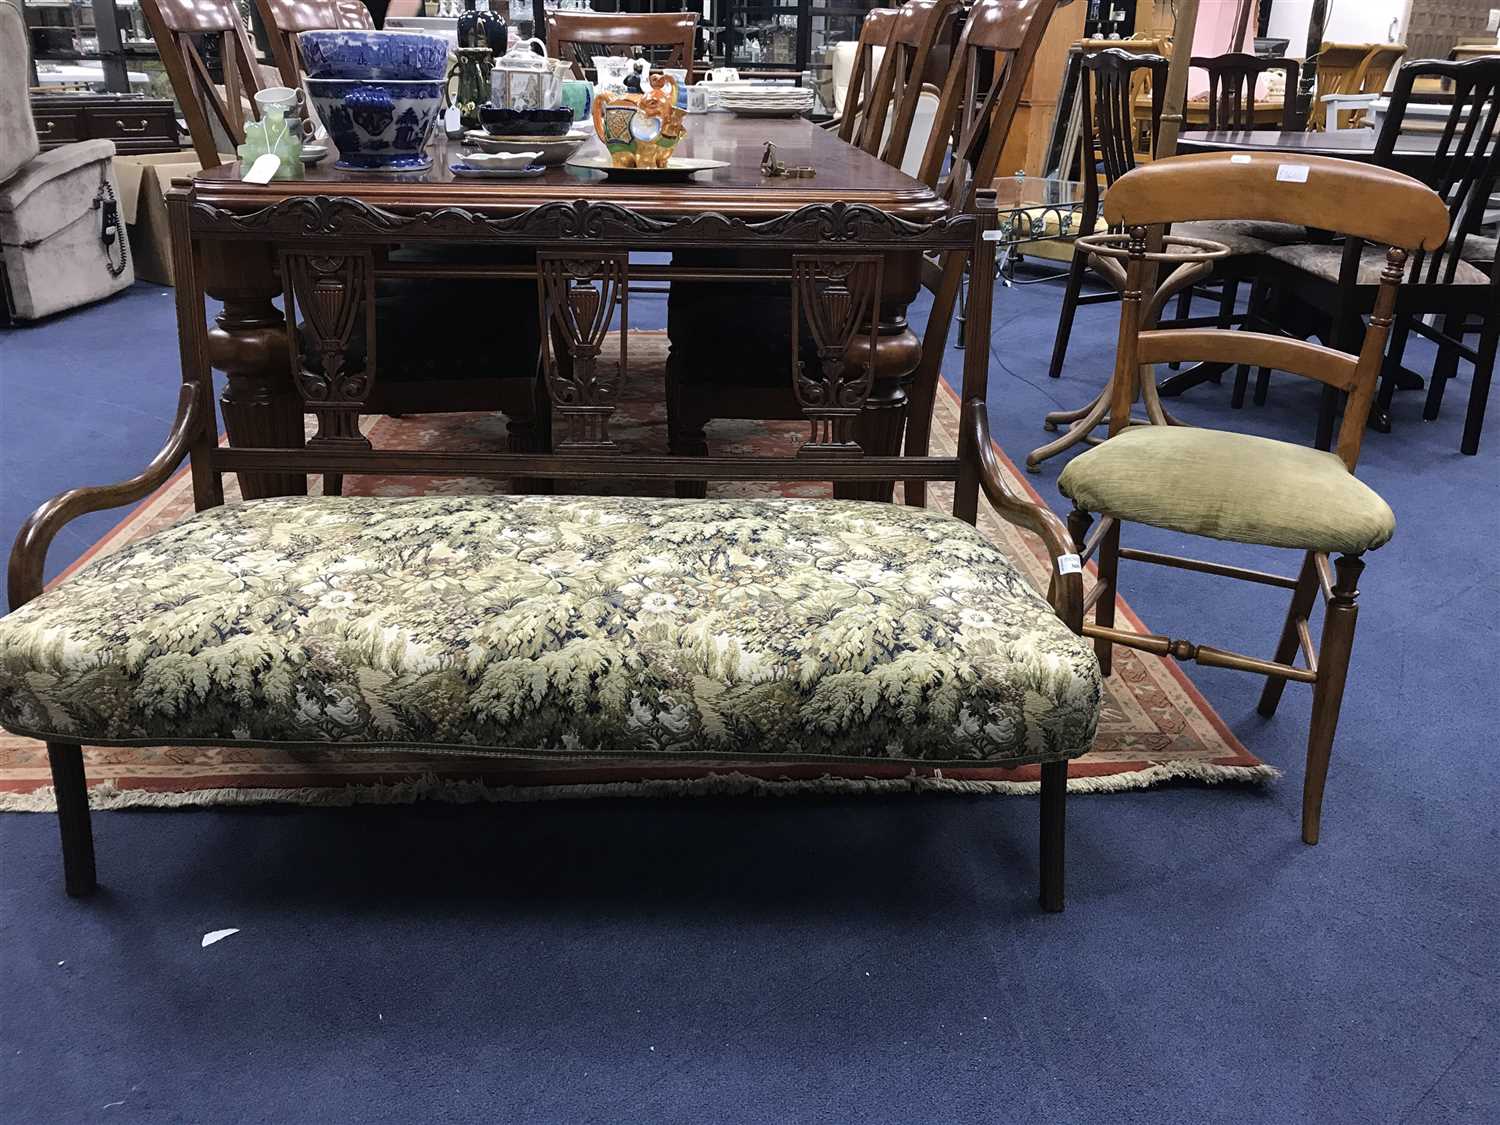 Lot 360 - AN EDWARDIAN DRAWING ROOM SETTEE AND A BEDROOM CHAIR